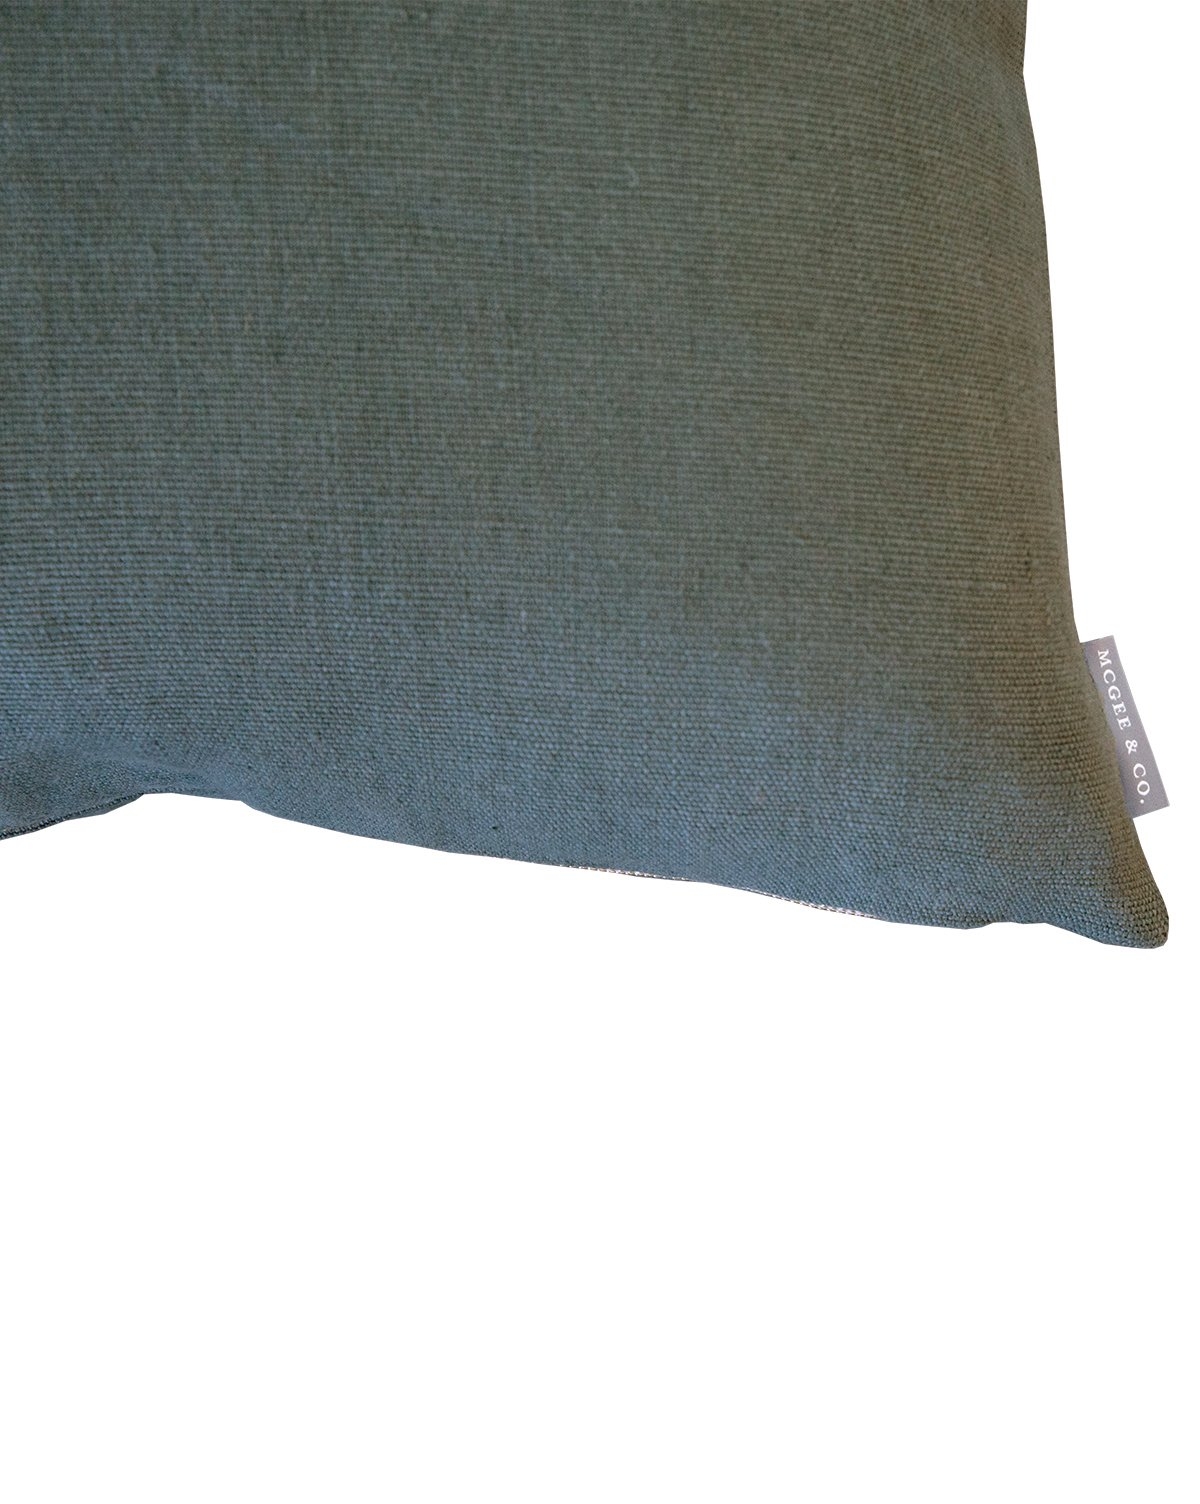 FOSTER PILLOW WITHOUT INSERT, 20" x 20" - Image 1